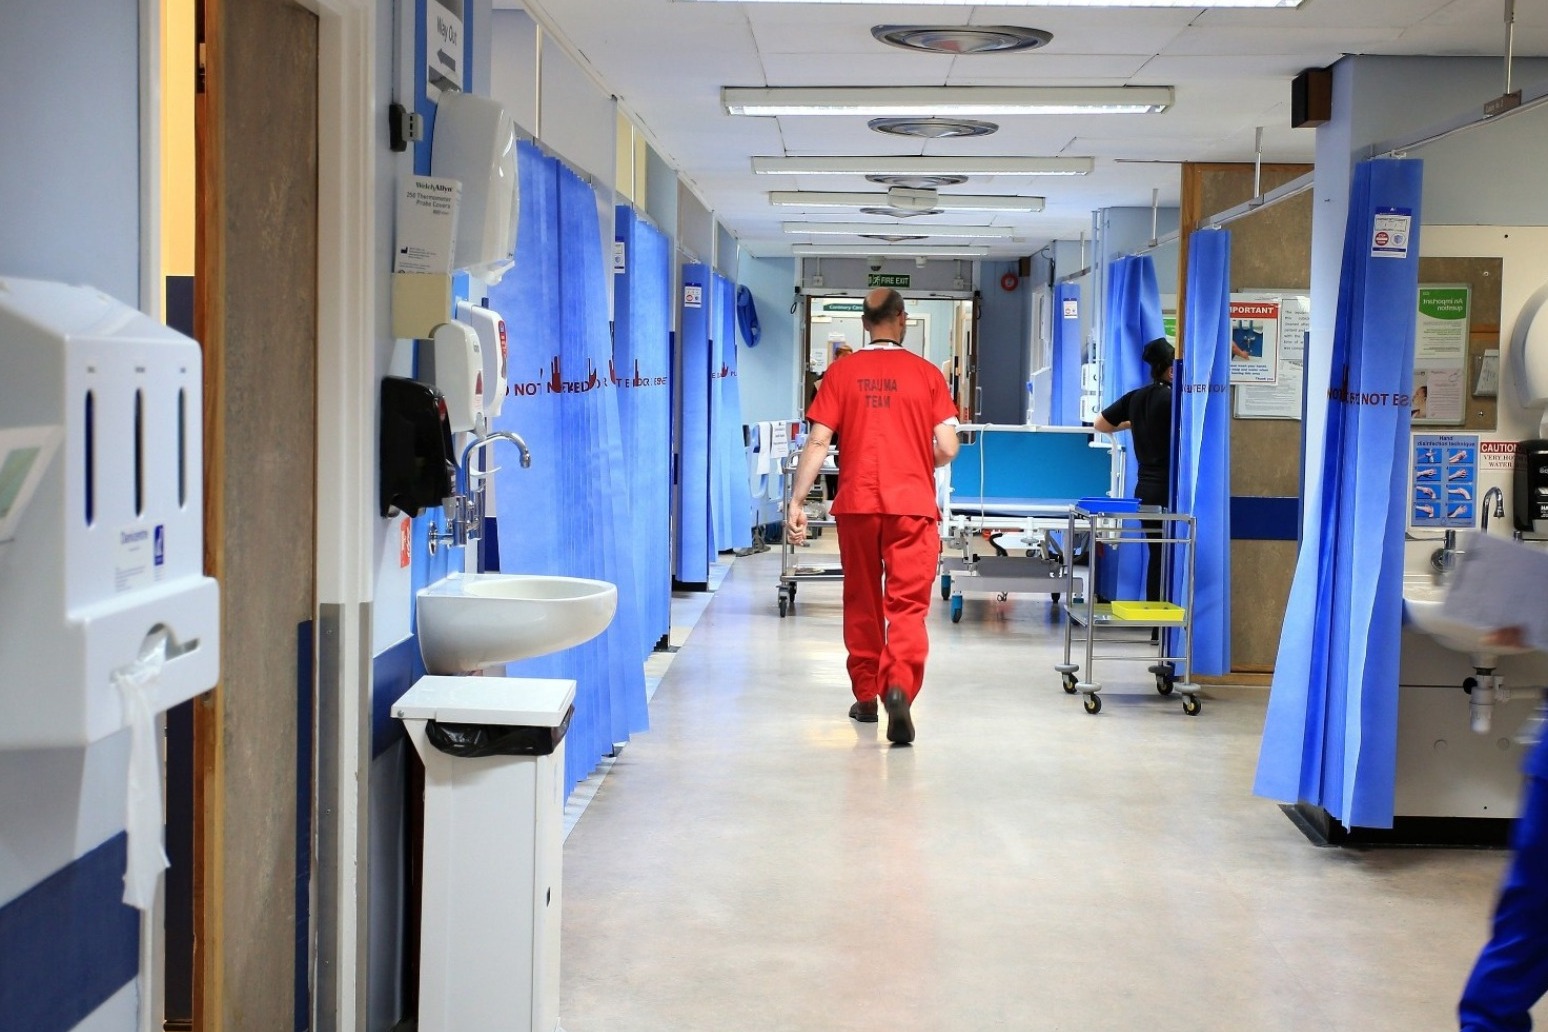 Hospital workers angry at PPE delays as death toll tops 16,000 